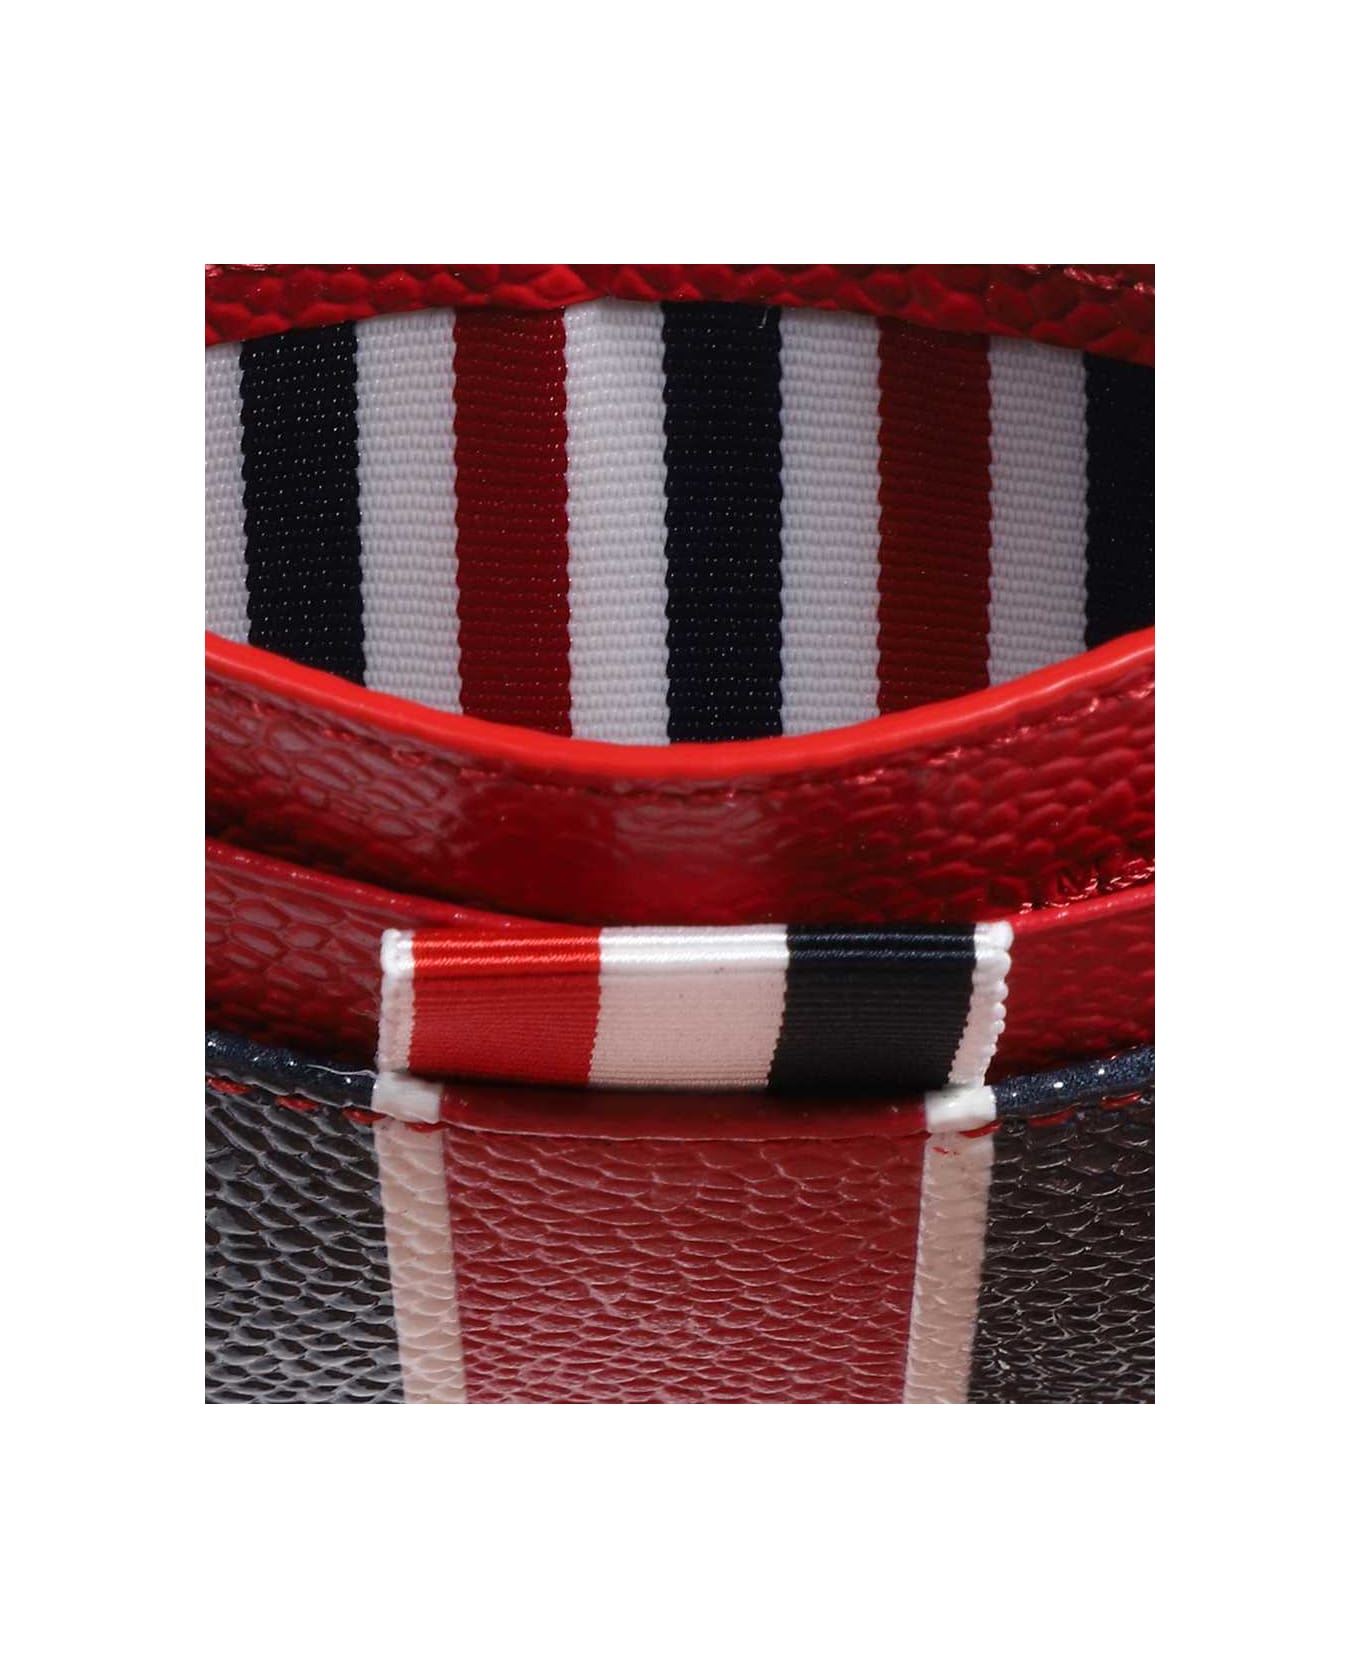 Thom Browne Leather Card Holder - Multicolor 財布